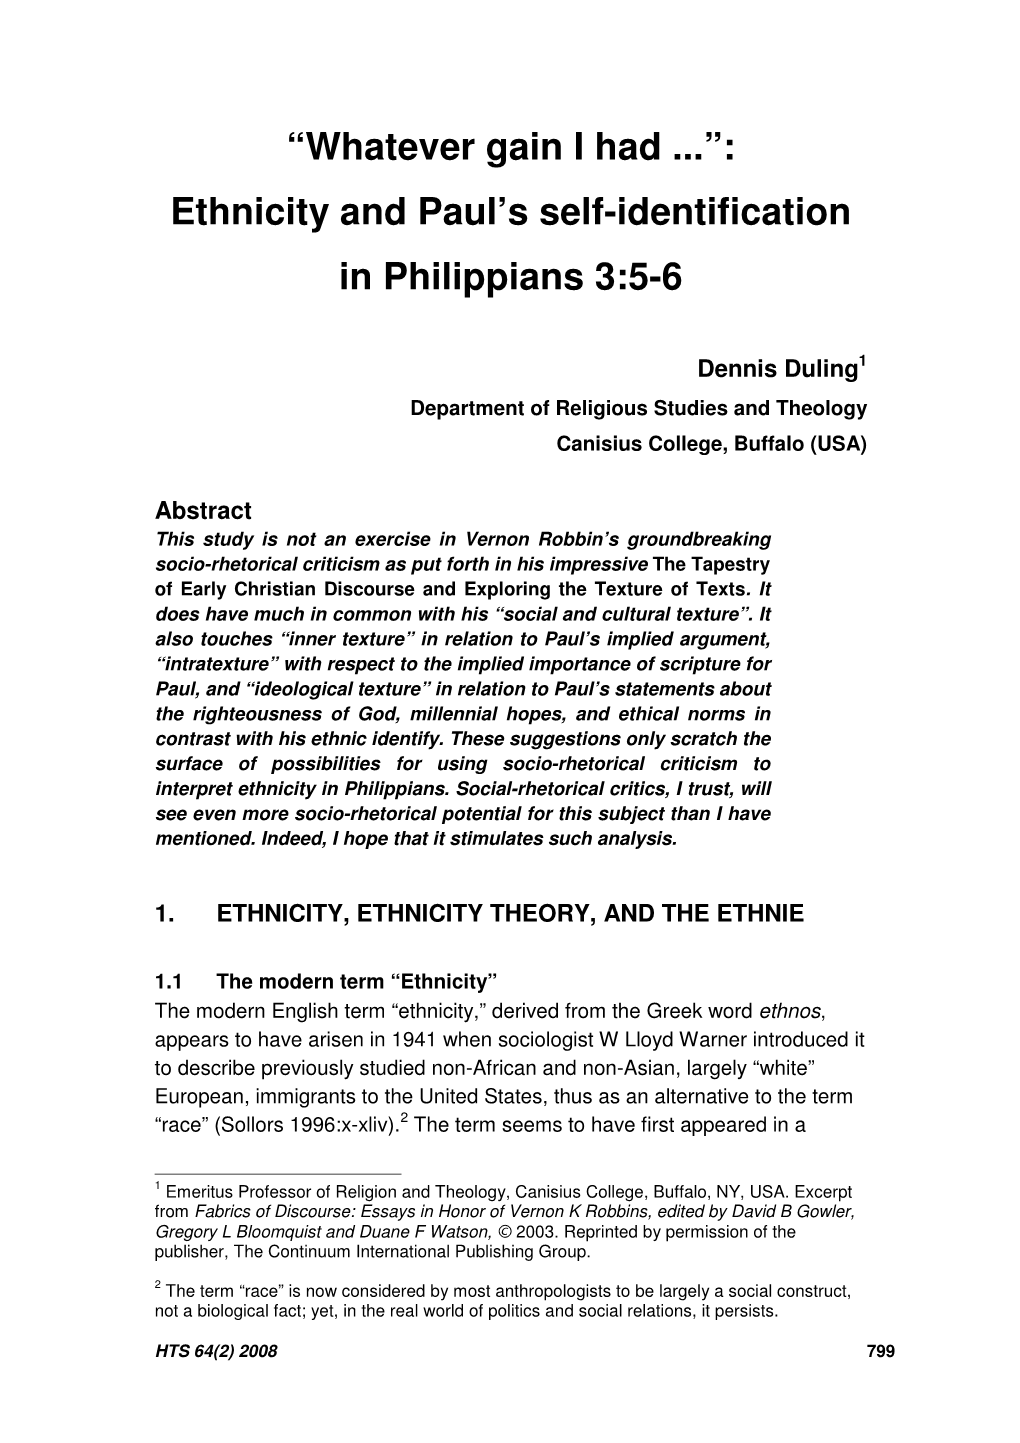 Ethnicity and Paul's Self-Identification in Philippians 3:5-6